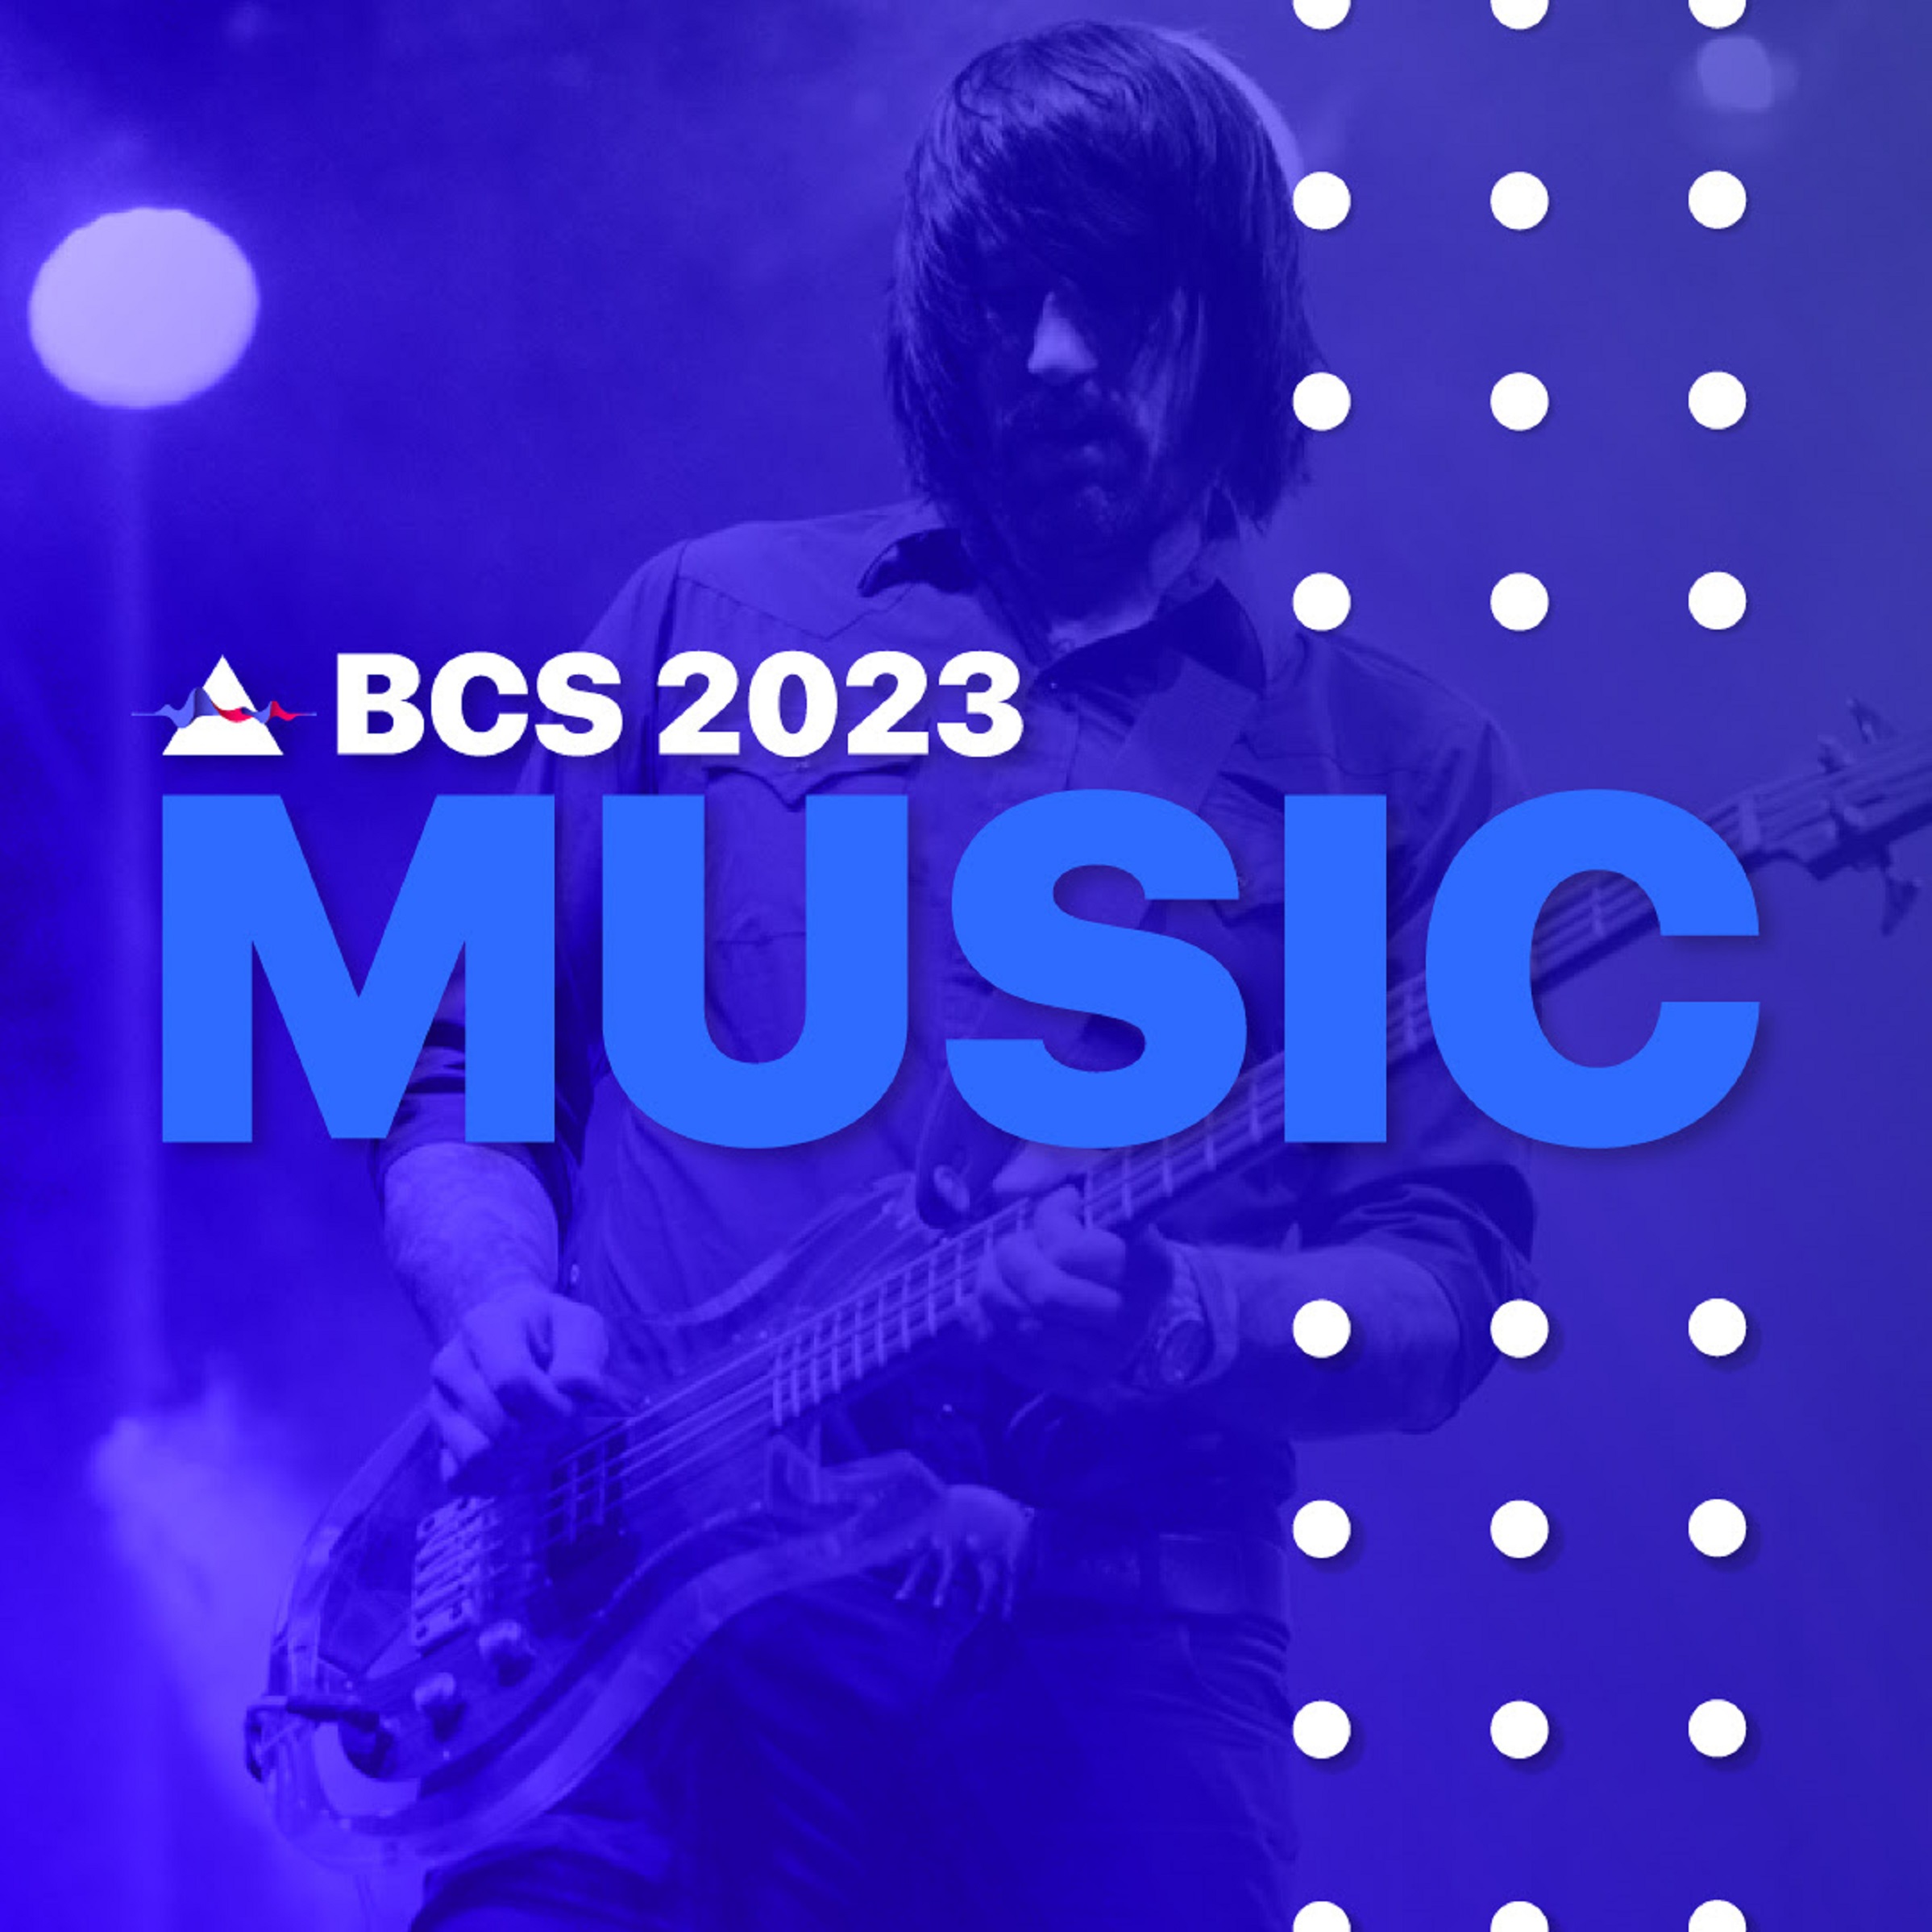 BCS 2023 Music Announces Support Artists for Headline Concerts at Motorco Music Hall